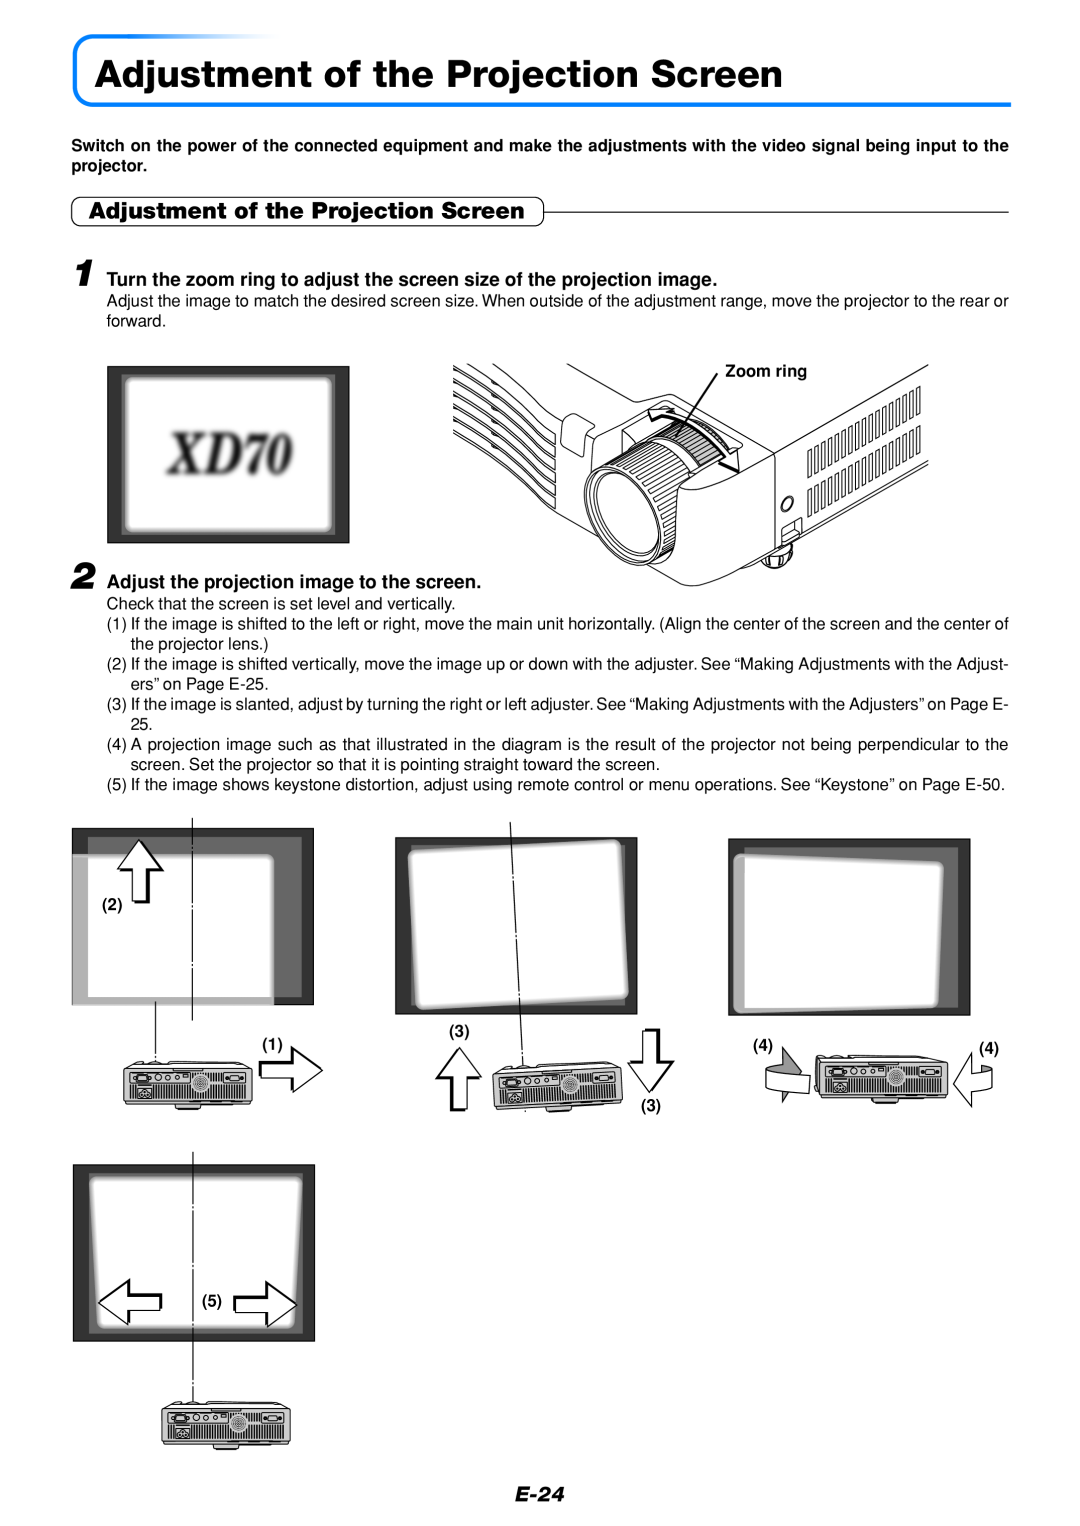 Mitsubishi Electronics DATA PROJECTOR Adjustment of the Projection Screen, E-24, Adjust the projection image to the screen 